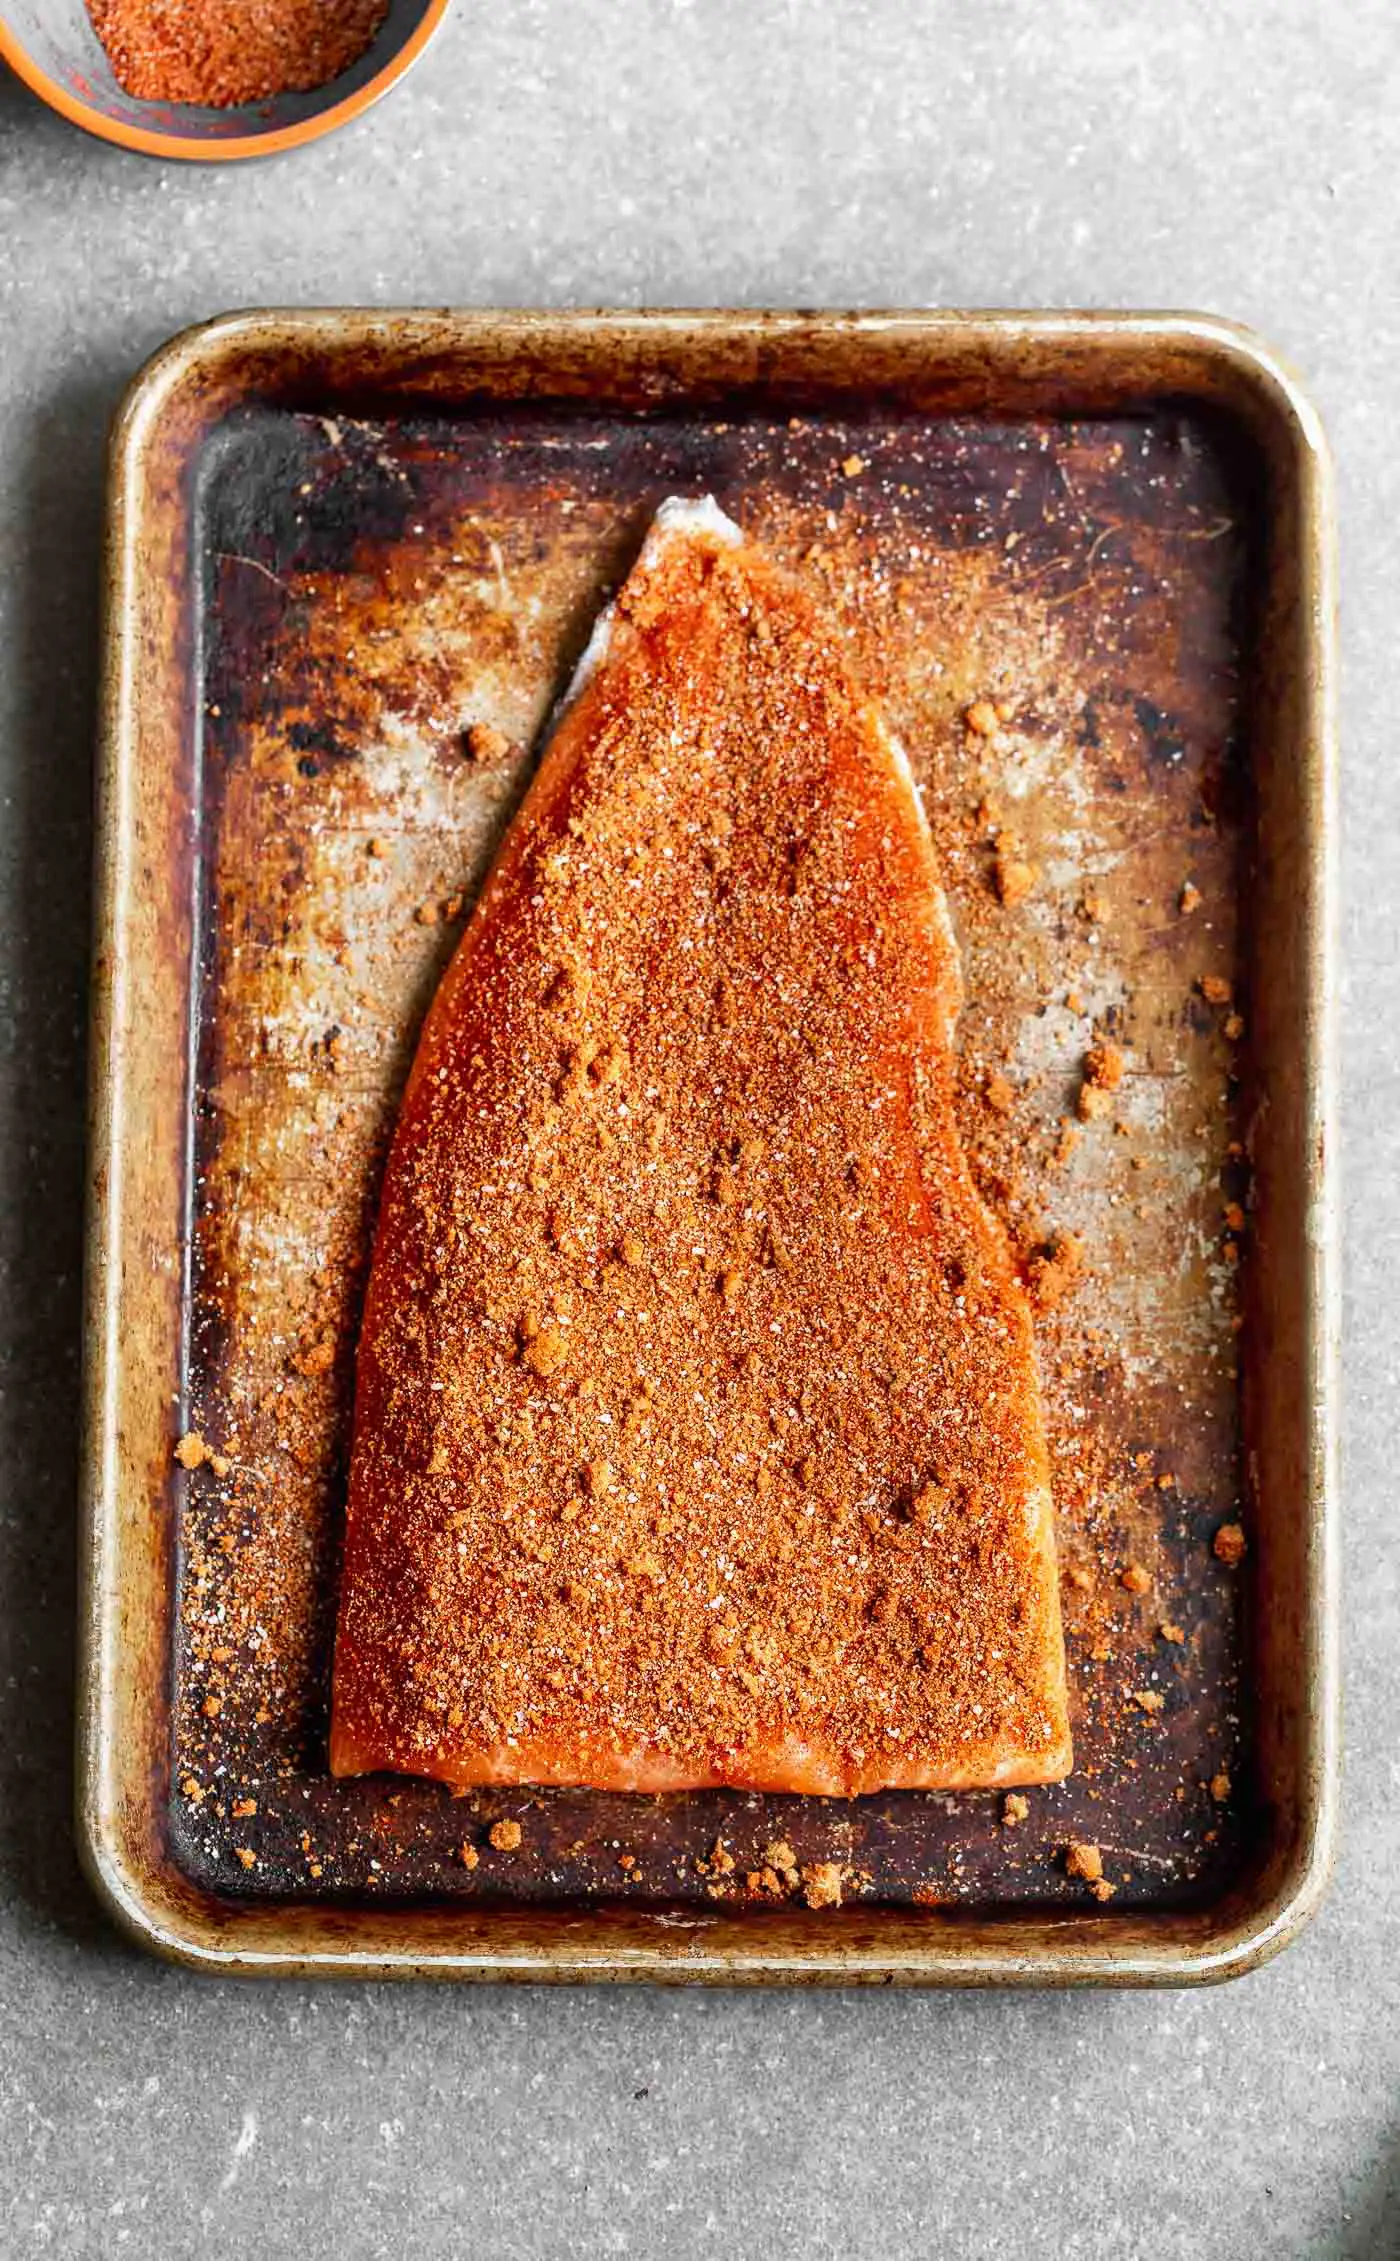 Press the rub into the side of the salmon.